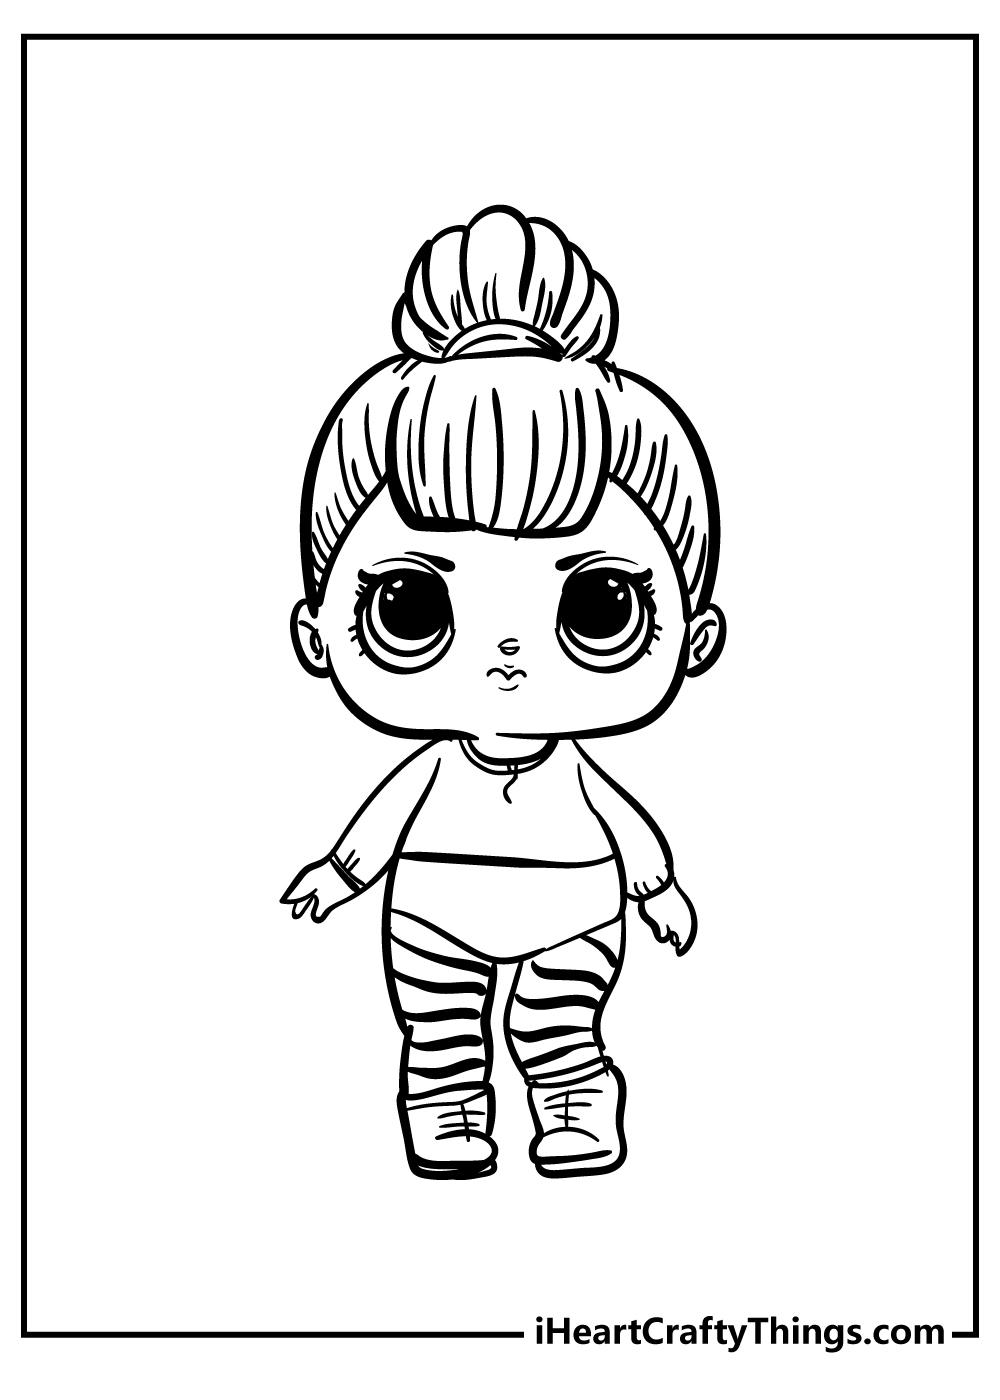 LOL doll coloring pages free printable